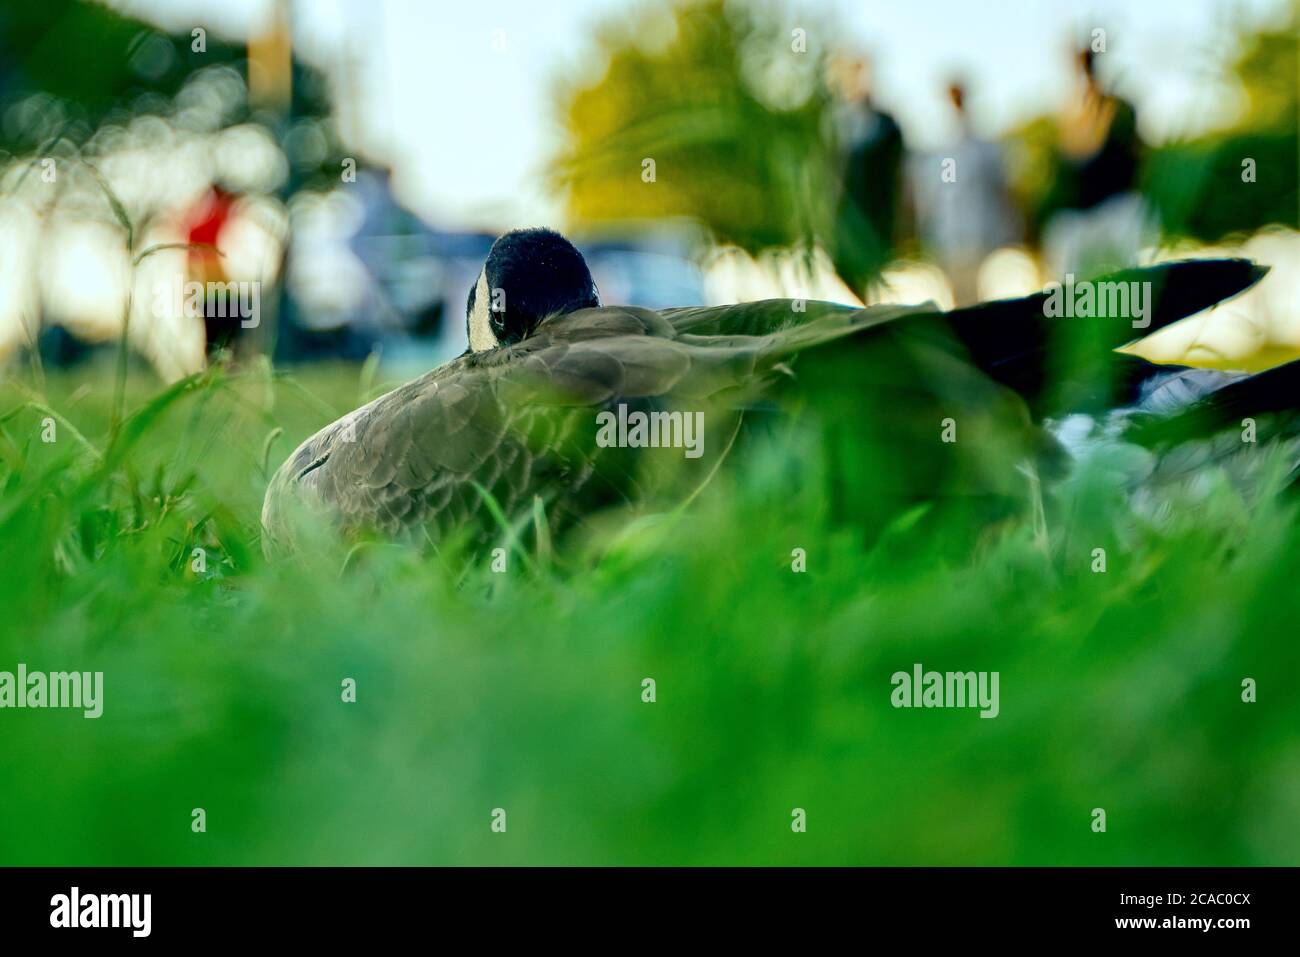 Bird laying on grass in public place Stock Photo